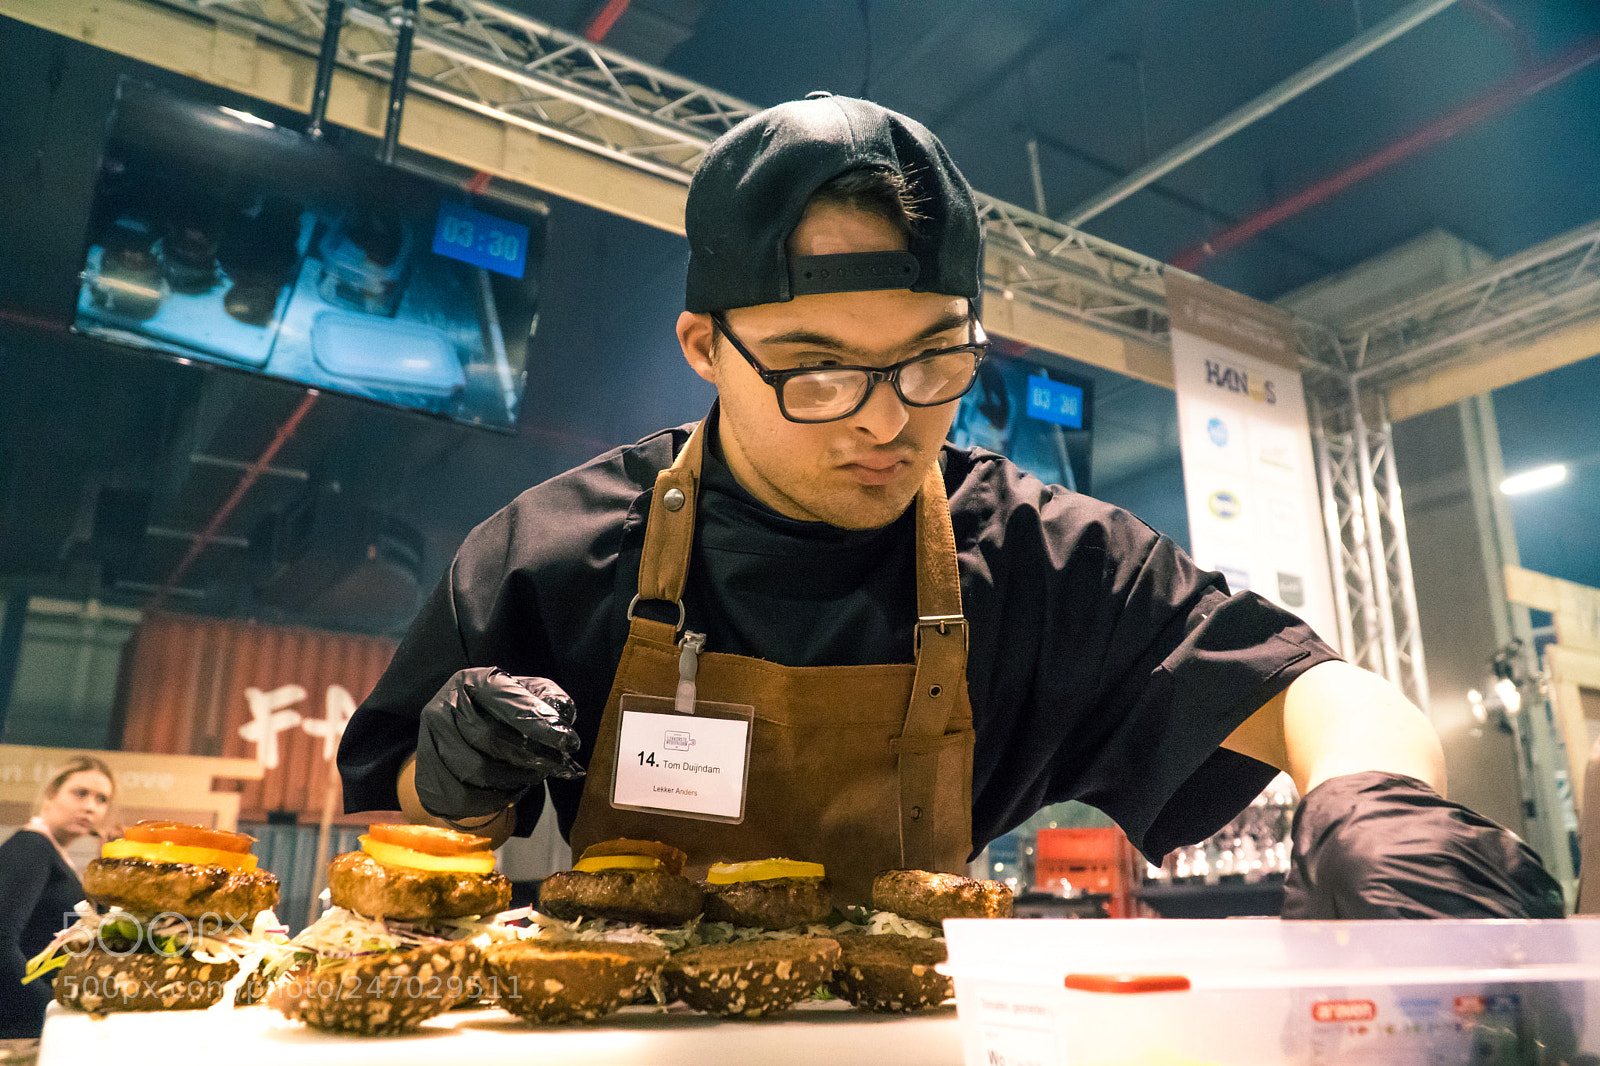 Sony a6300 sample photo. Food exhibition photography